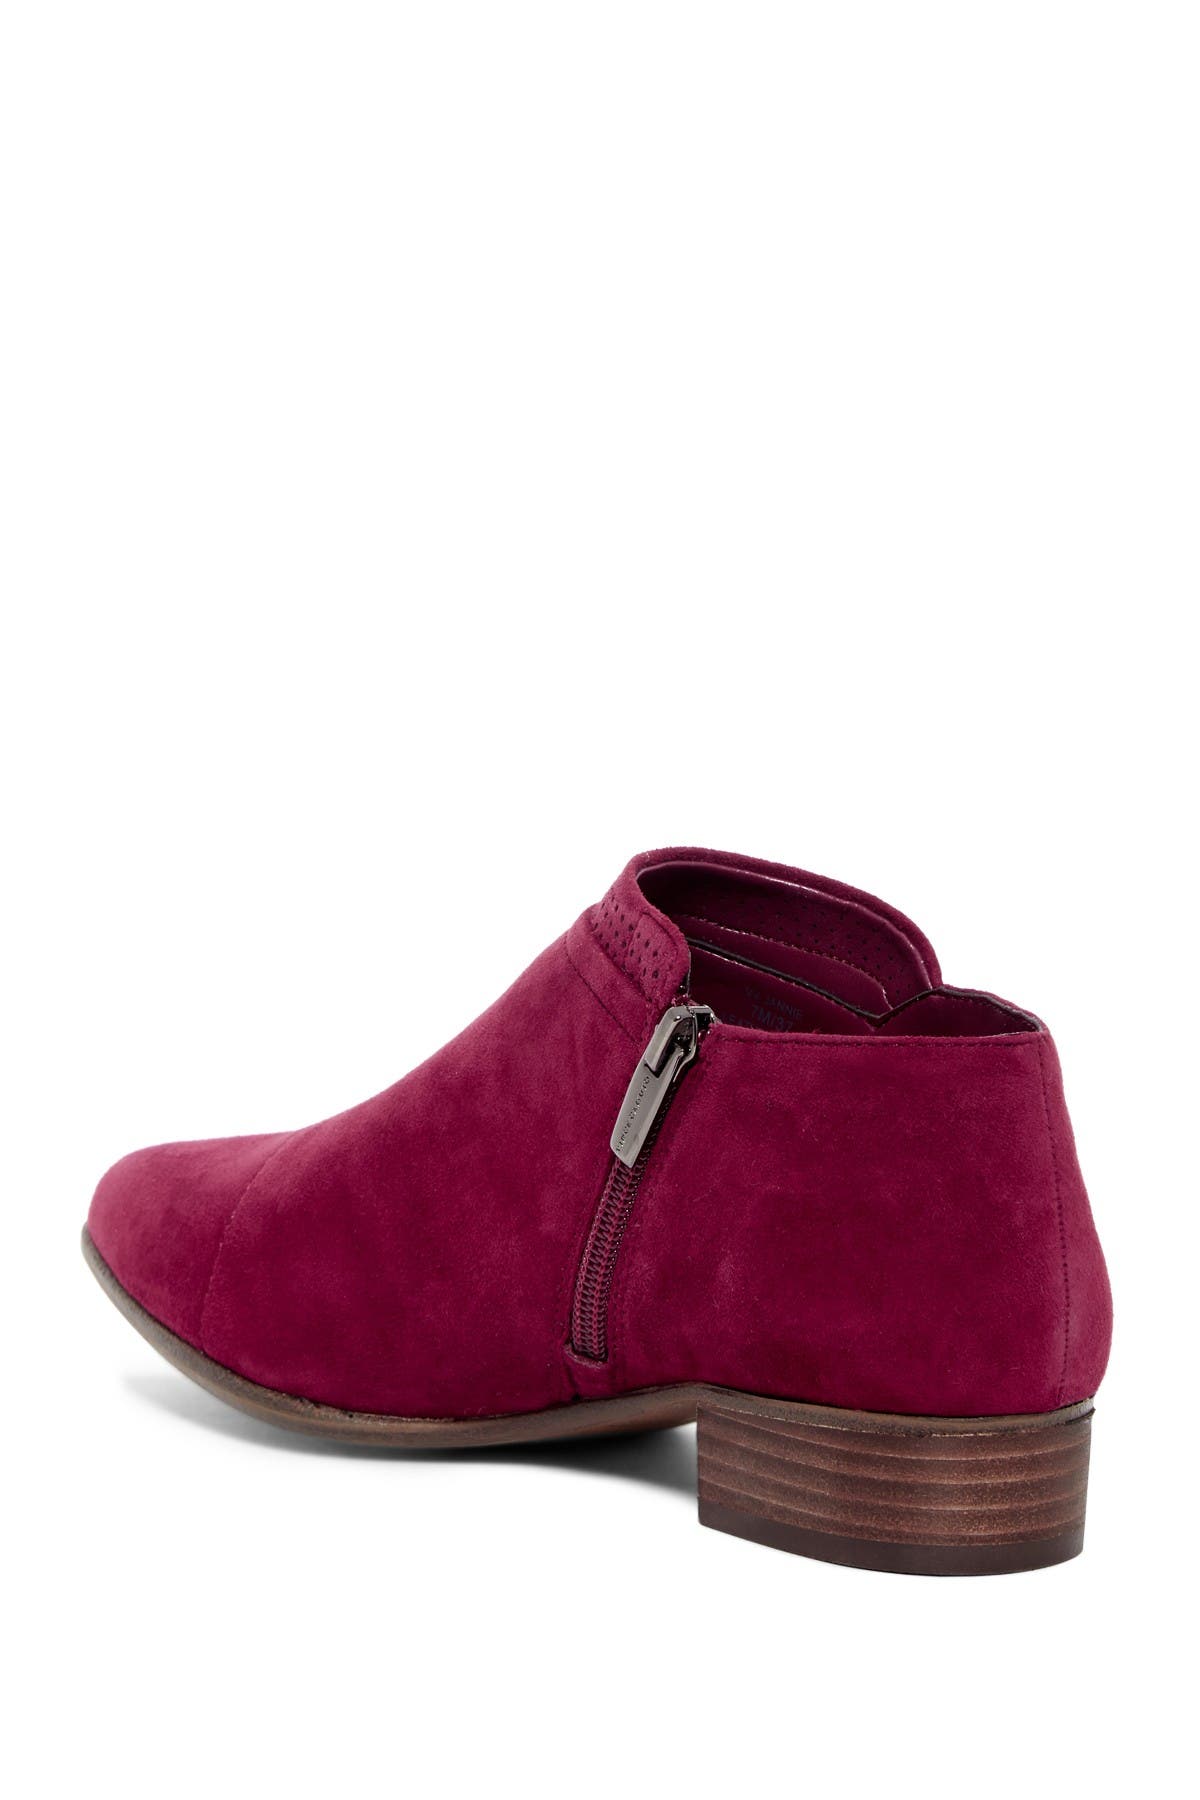 vince camuto jannie suede ankle bootie